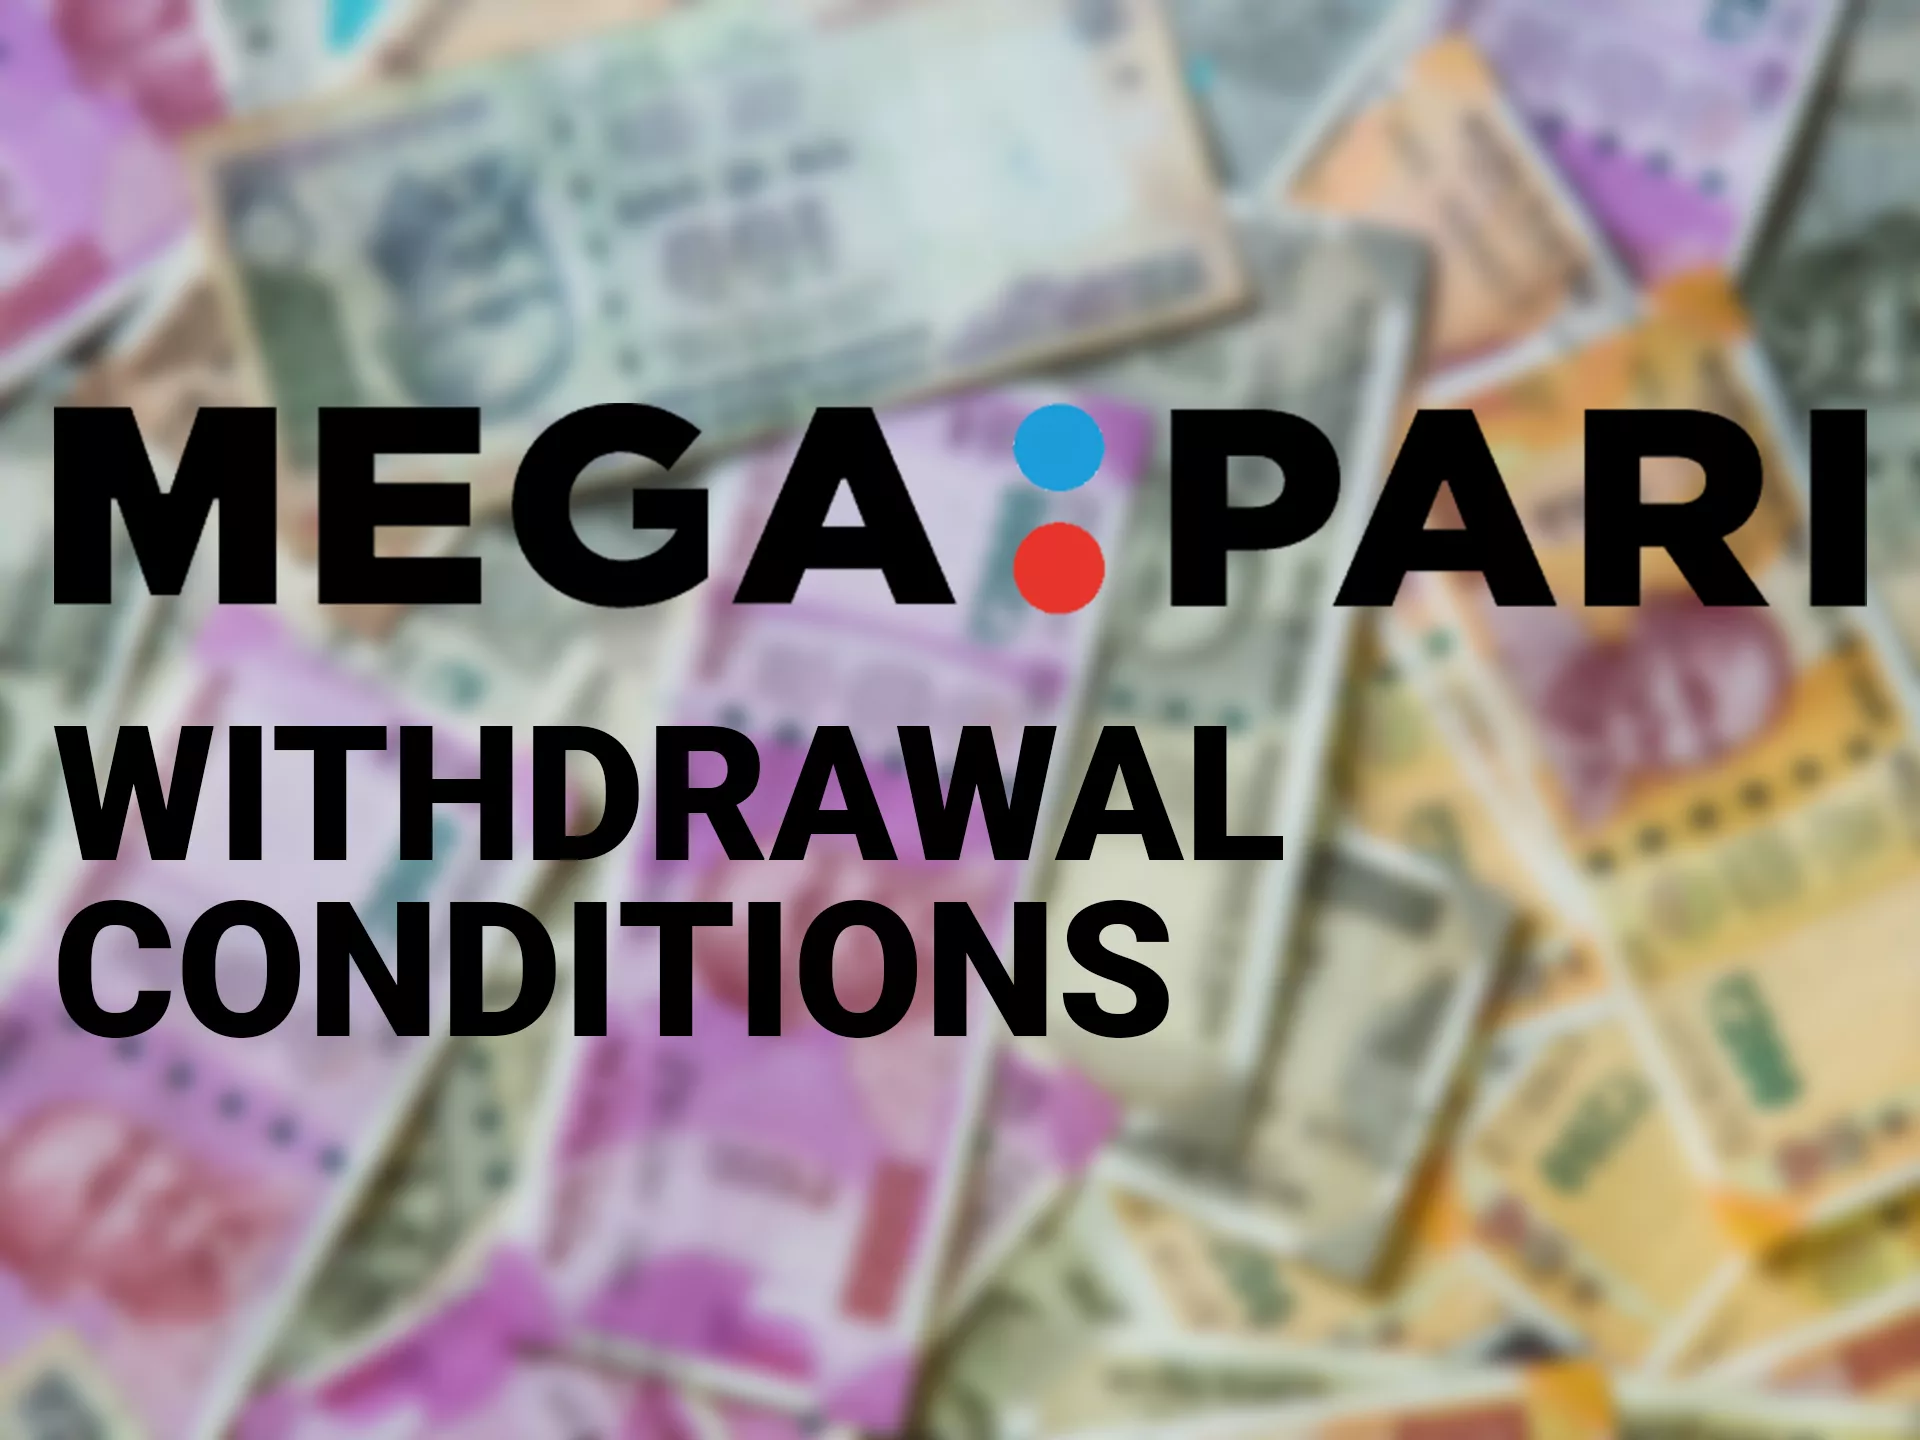 Learn the Megapari withdrawal conditions to avoid issues.